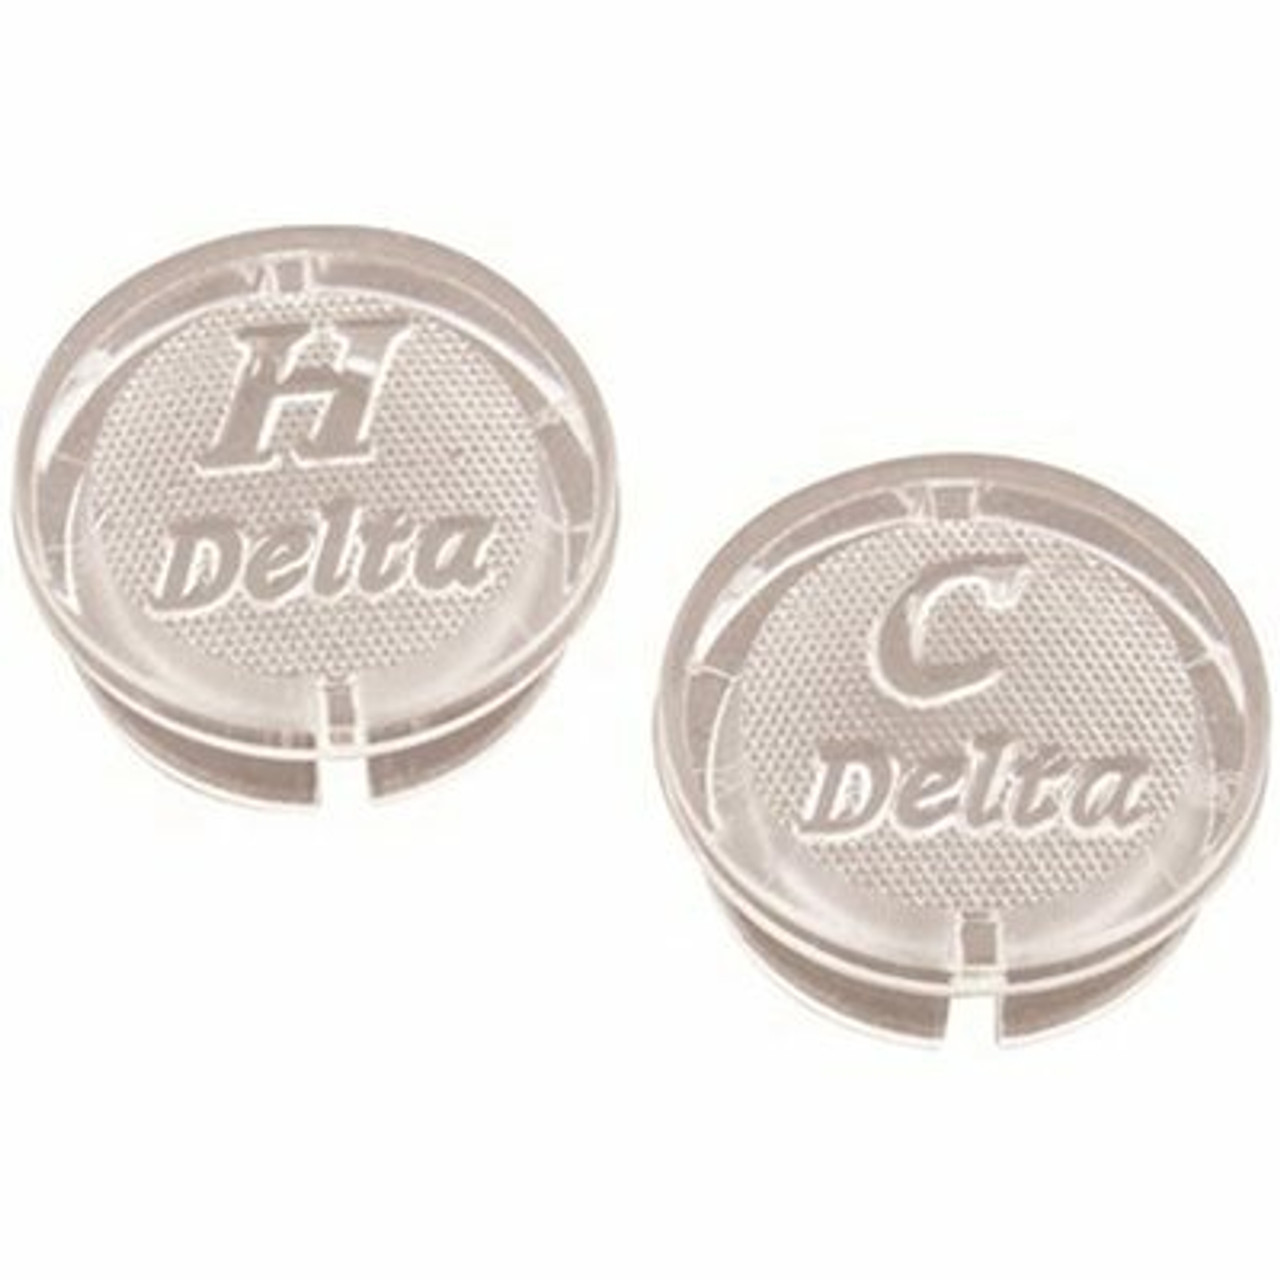 Delta 3/4 In. Od Hot And Cold Index Button Set